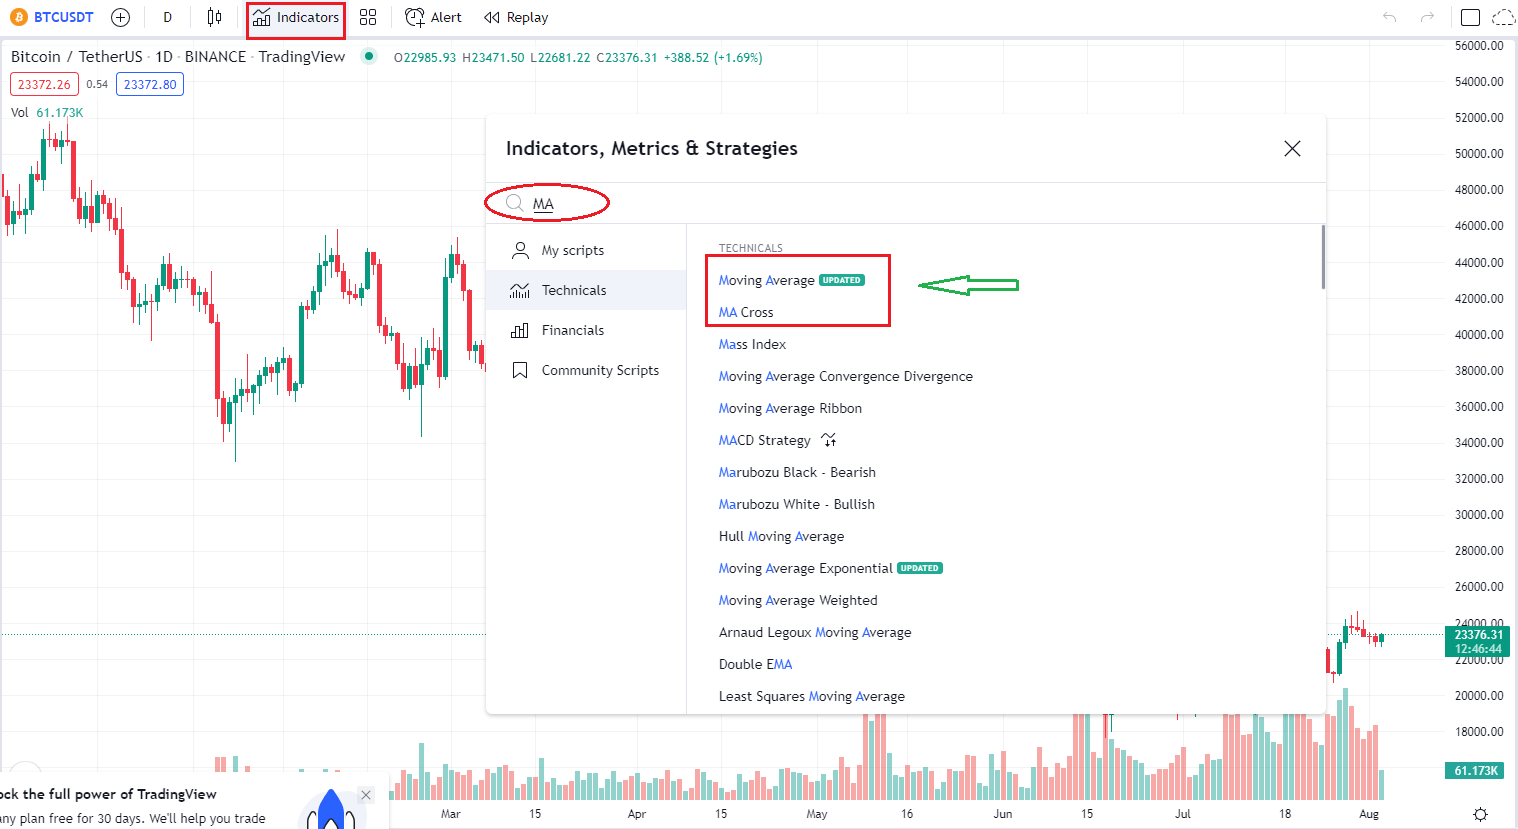 Click [Indicators] to search for the keyword "Moving Average" or MA